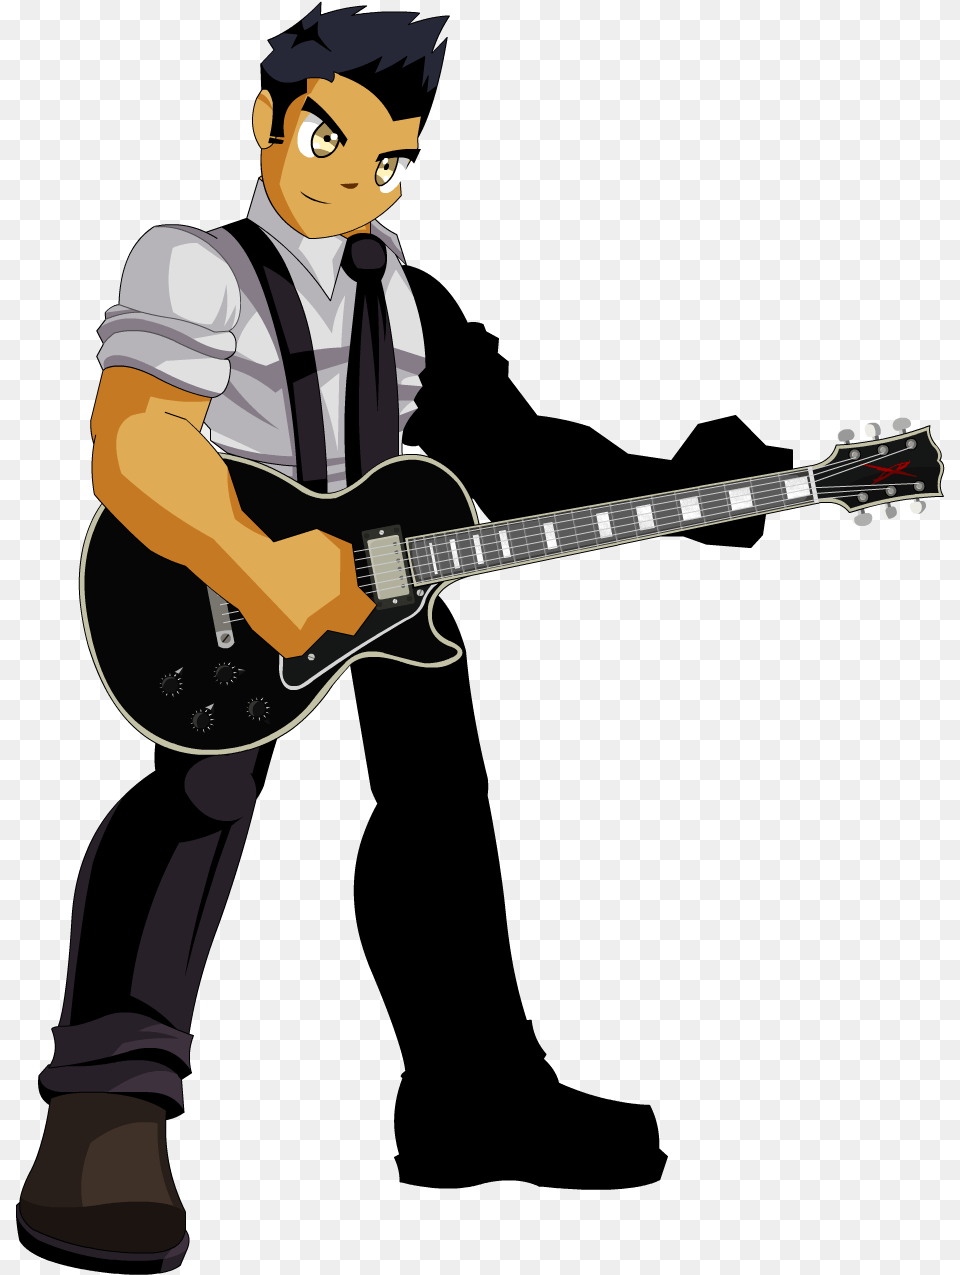 The Guitar Took Me 2 Days To Complete Guitarist Animated, Musical Instrument, Person, Performer, Musician Free Transparent Png